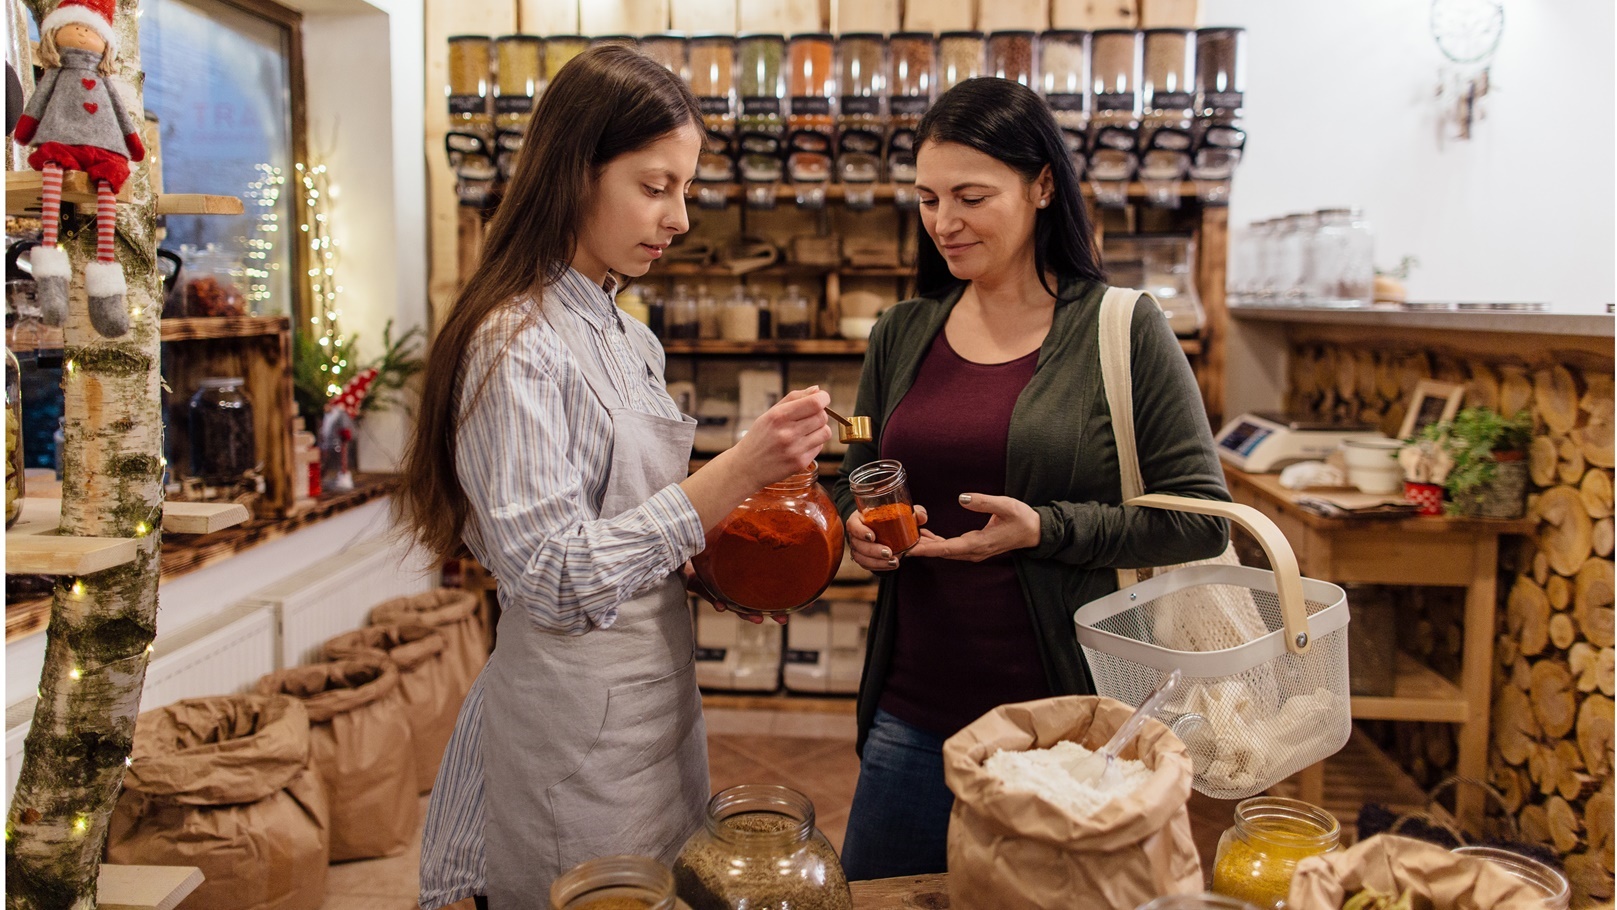 woman-buying-herbs-and-spices-in-plastic-free-shop-2021-08-30-02-29-01-utc